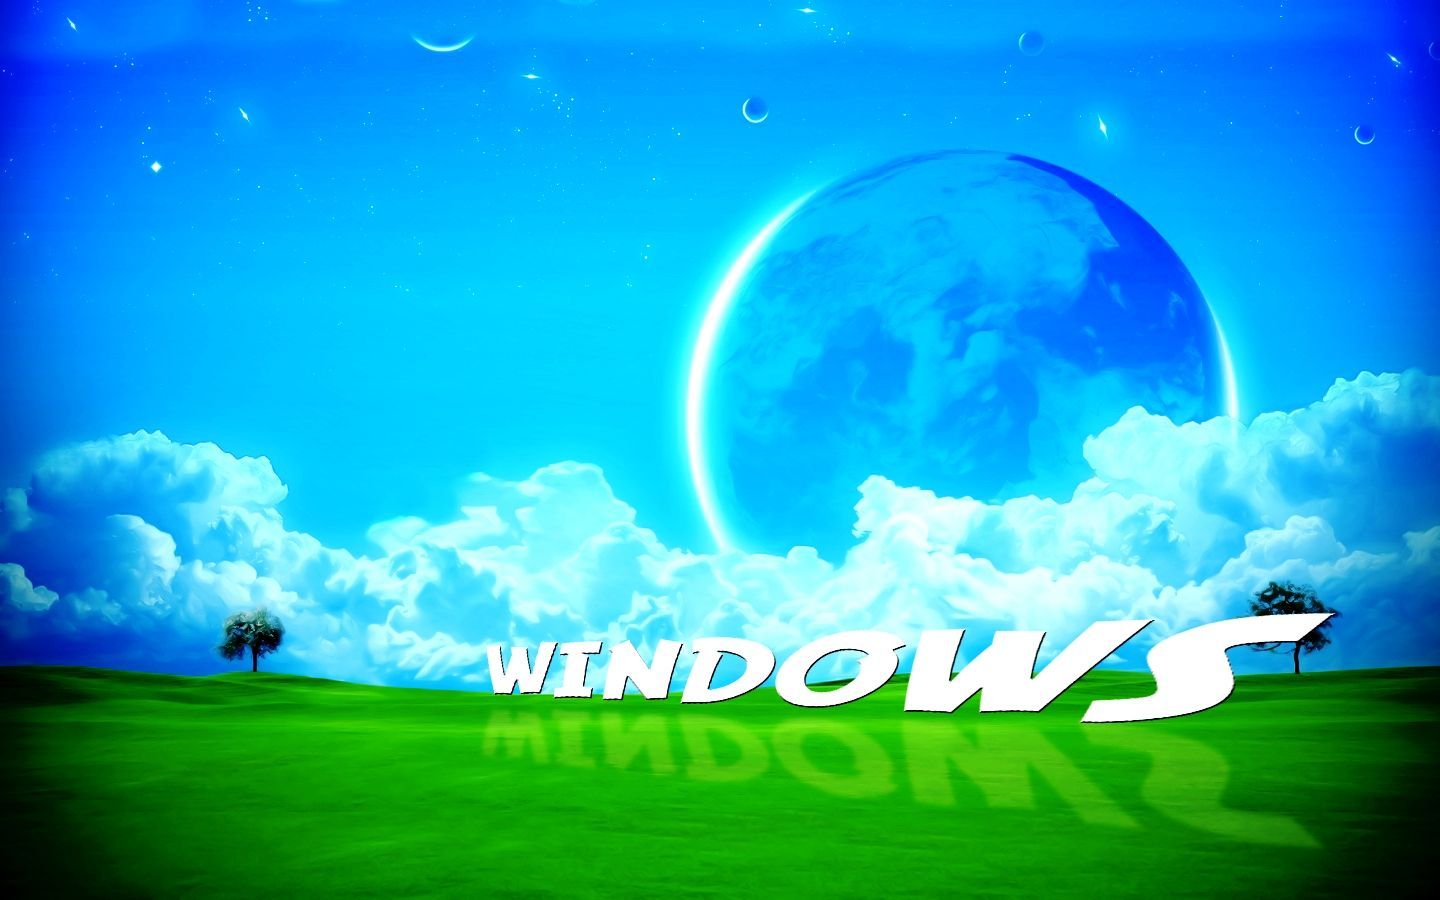 Download Free Animated Desktop Backgrounds For Xp Now Animated by